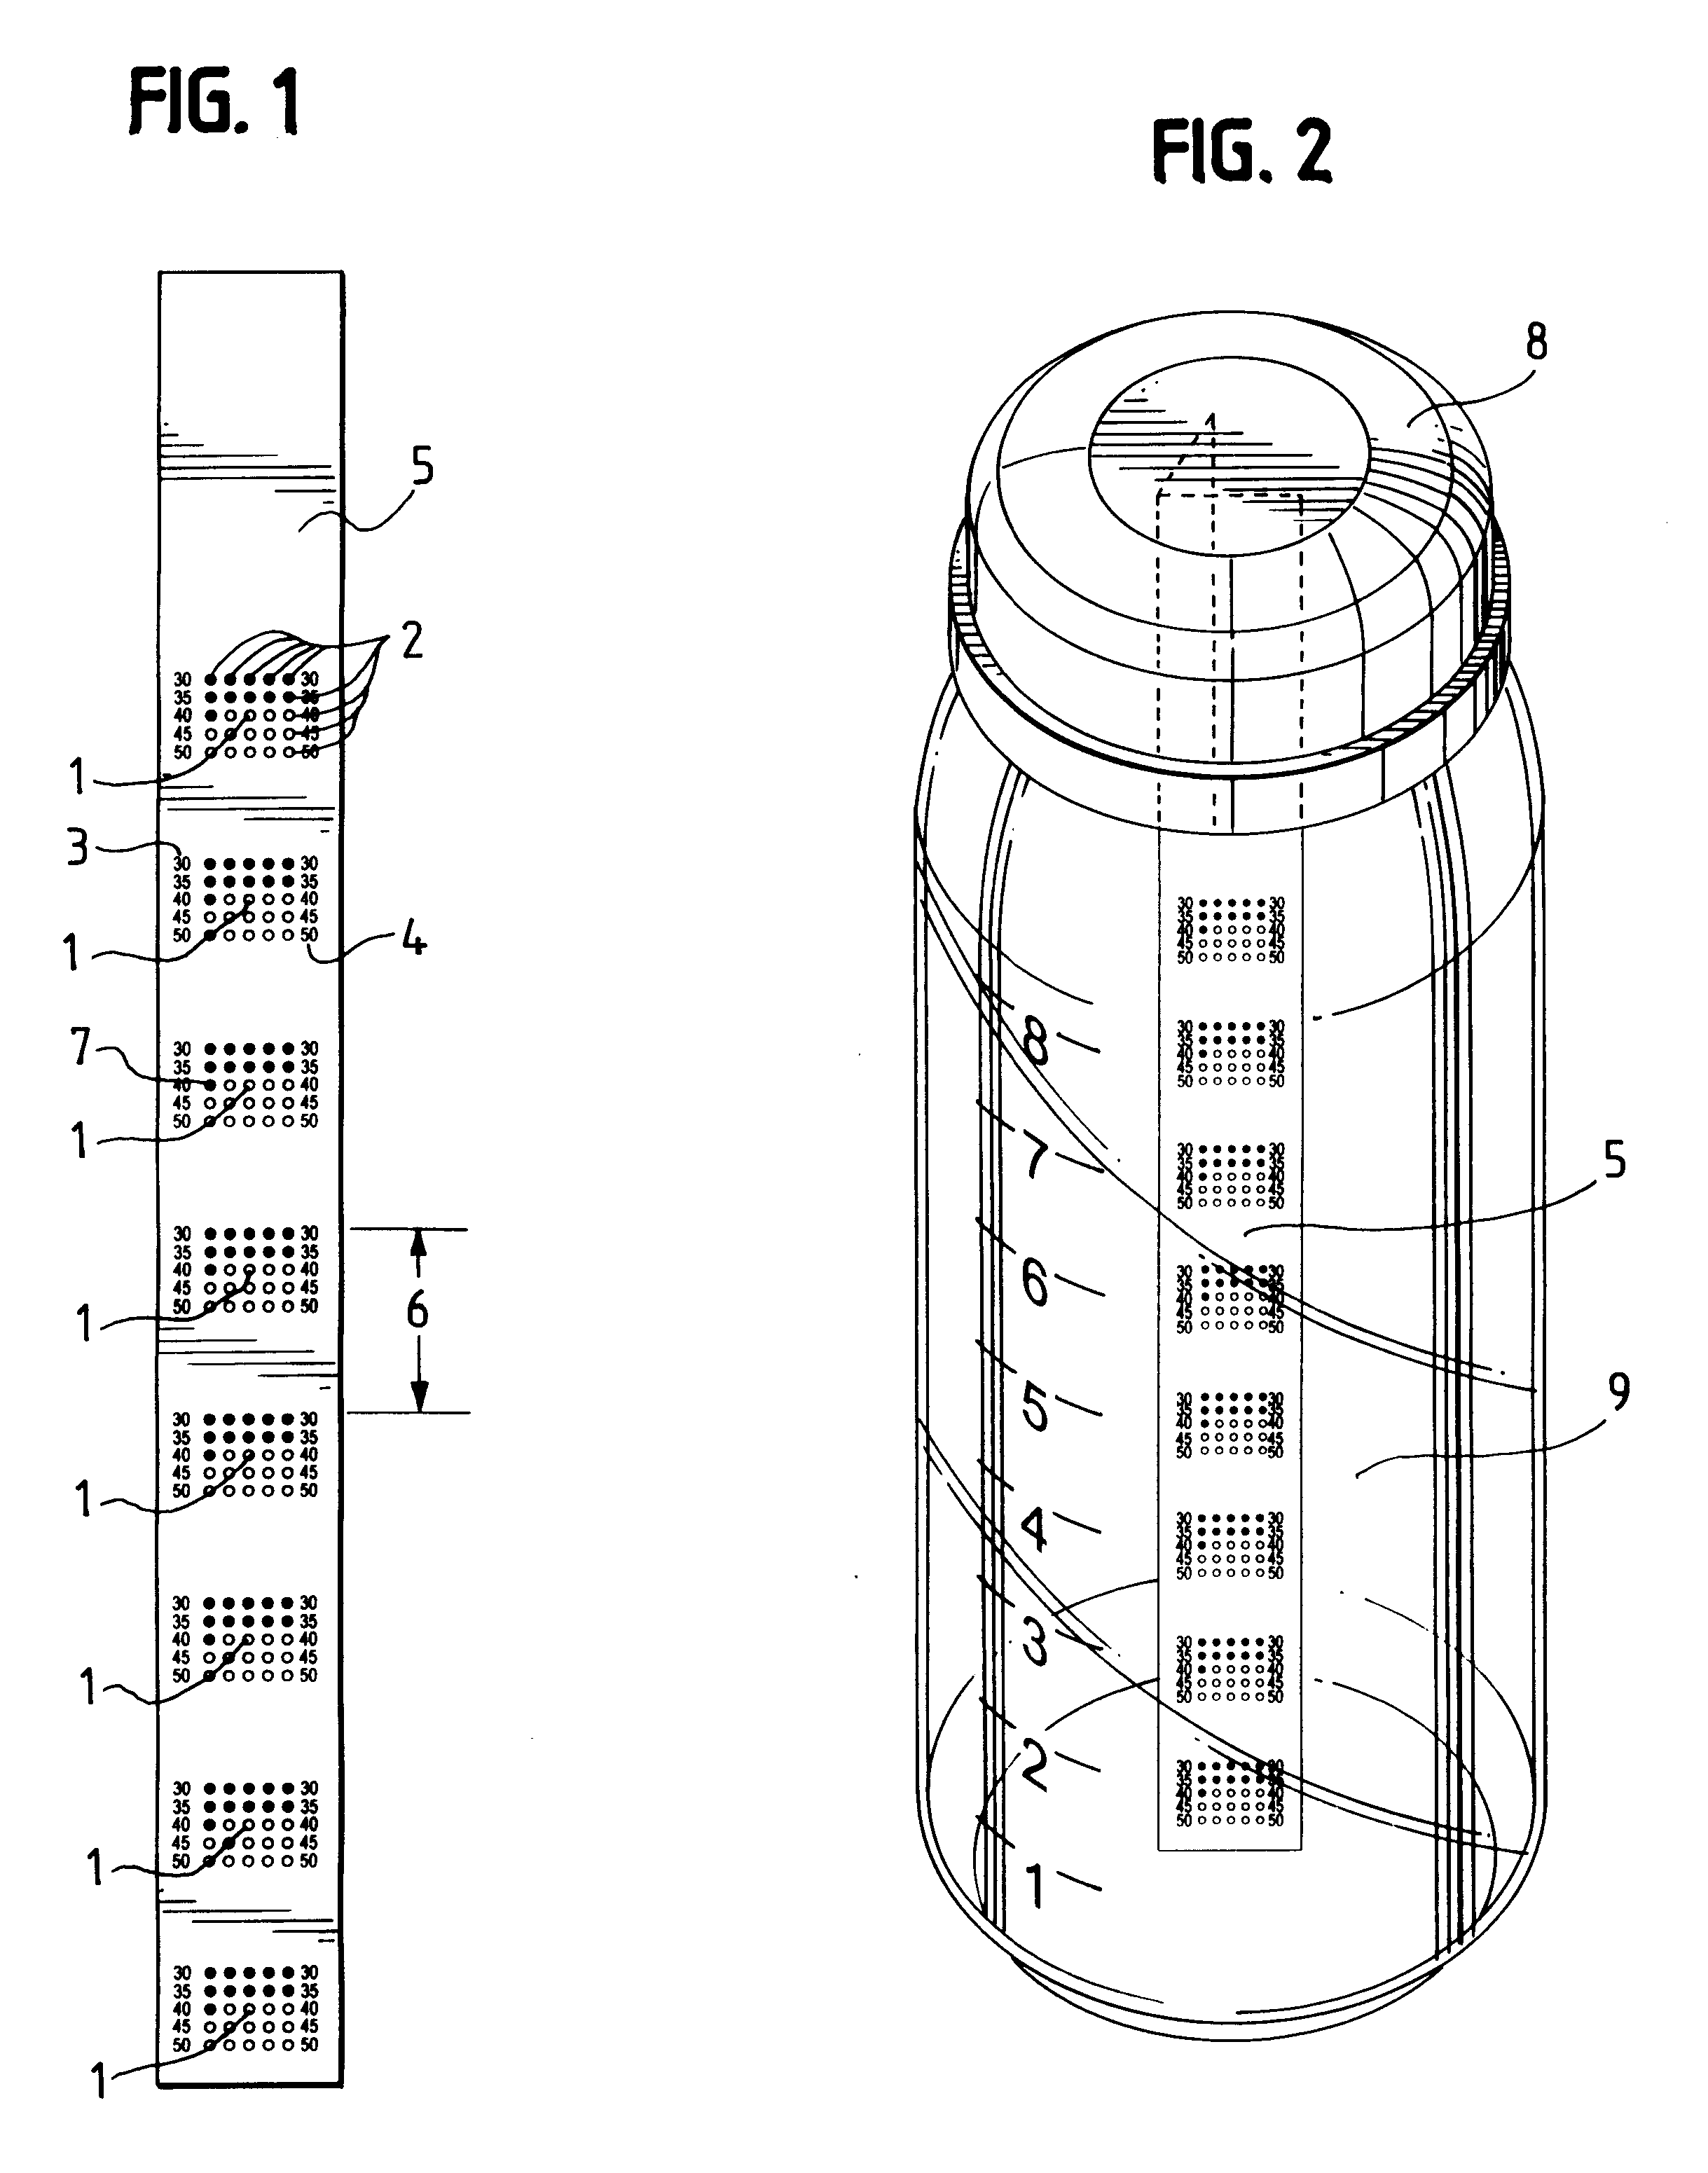 Shielding method for microwave heating of infant formulae to a safe and uniform temperature